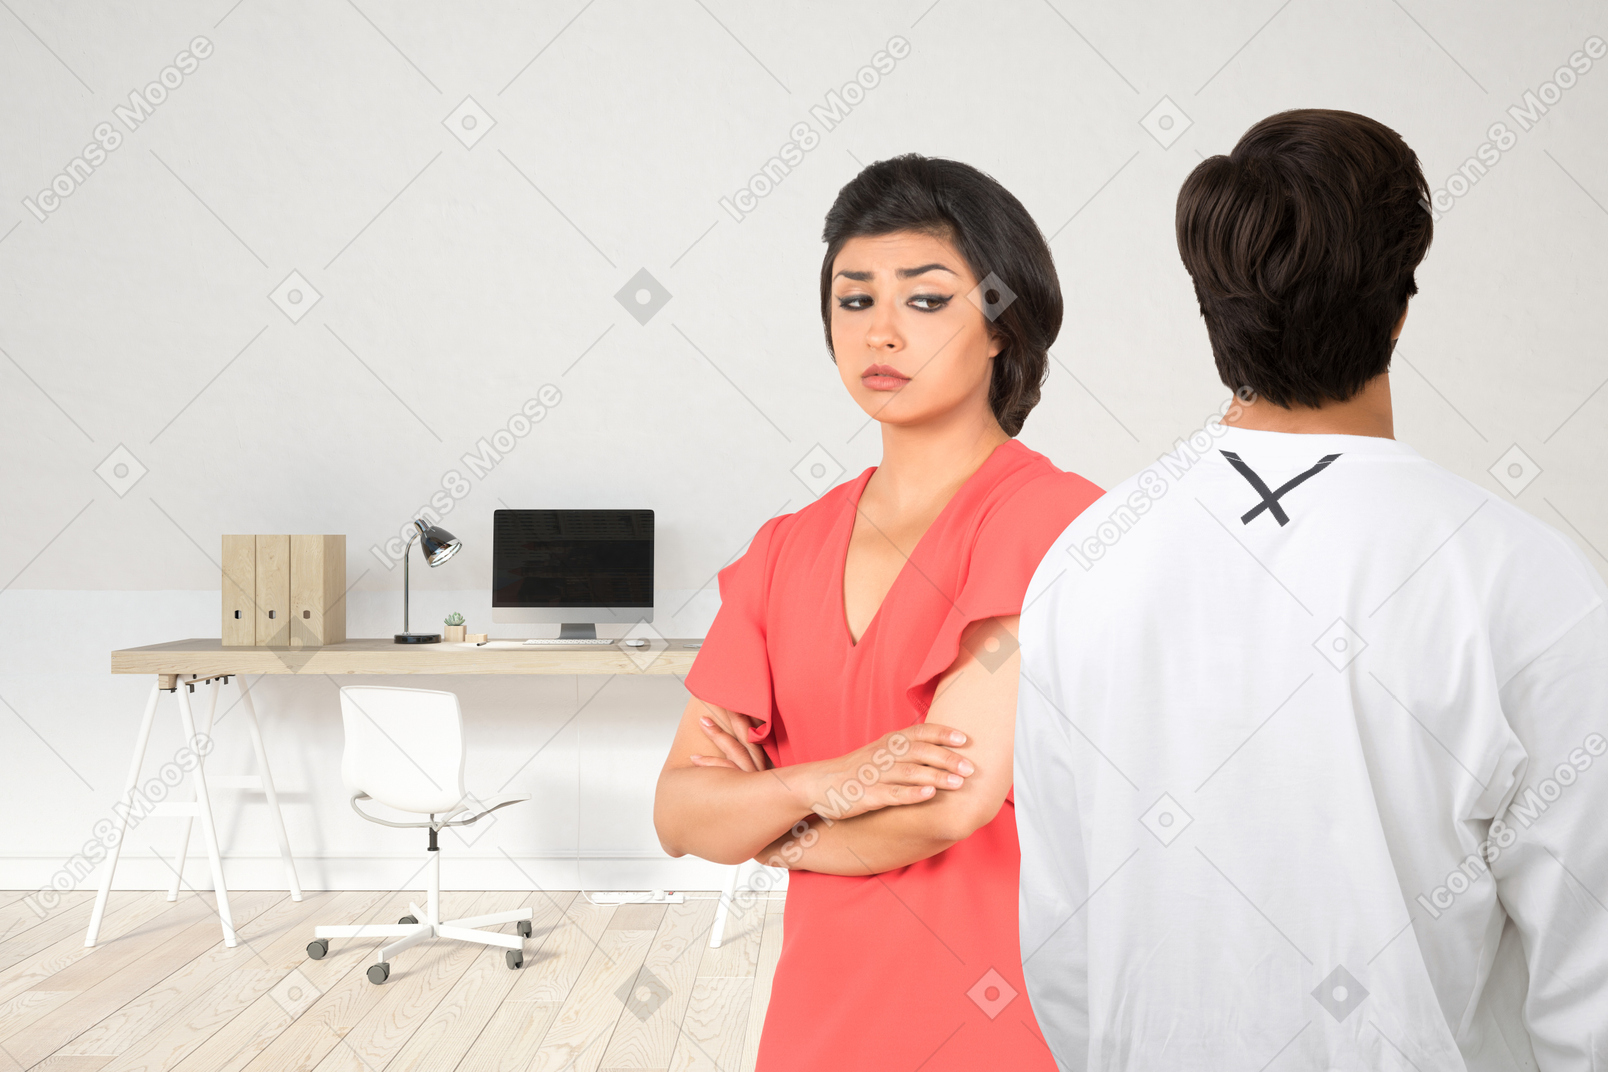 A man standing next to a woman in an office